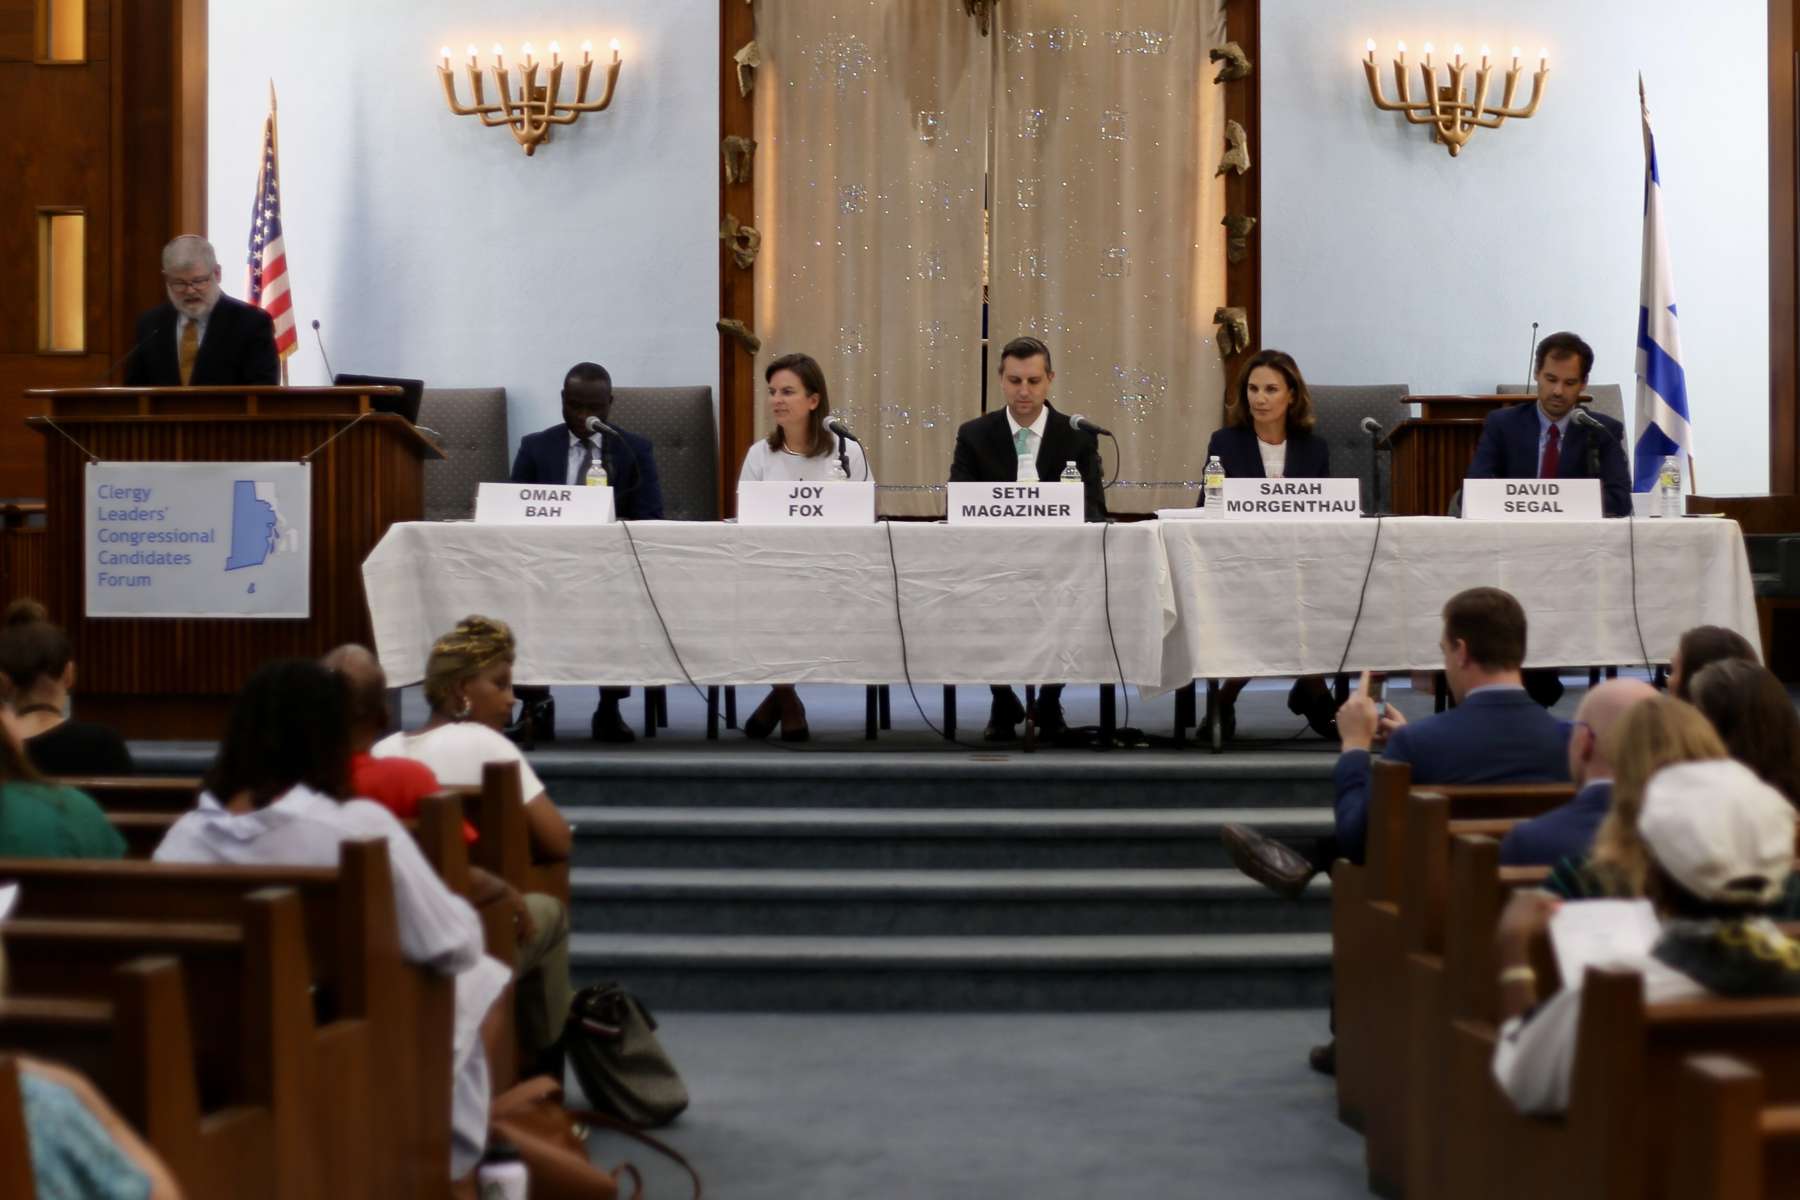 Rhode Island News: Candidates for Second Congressional District get philosophical at clergy leaders’ forum